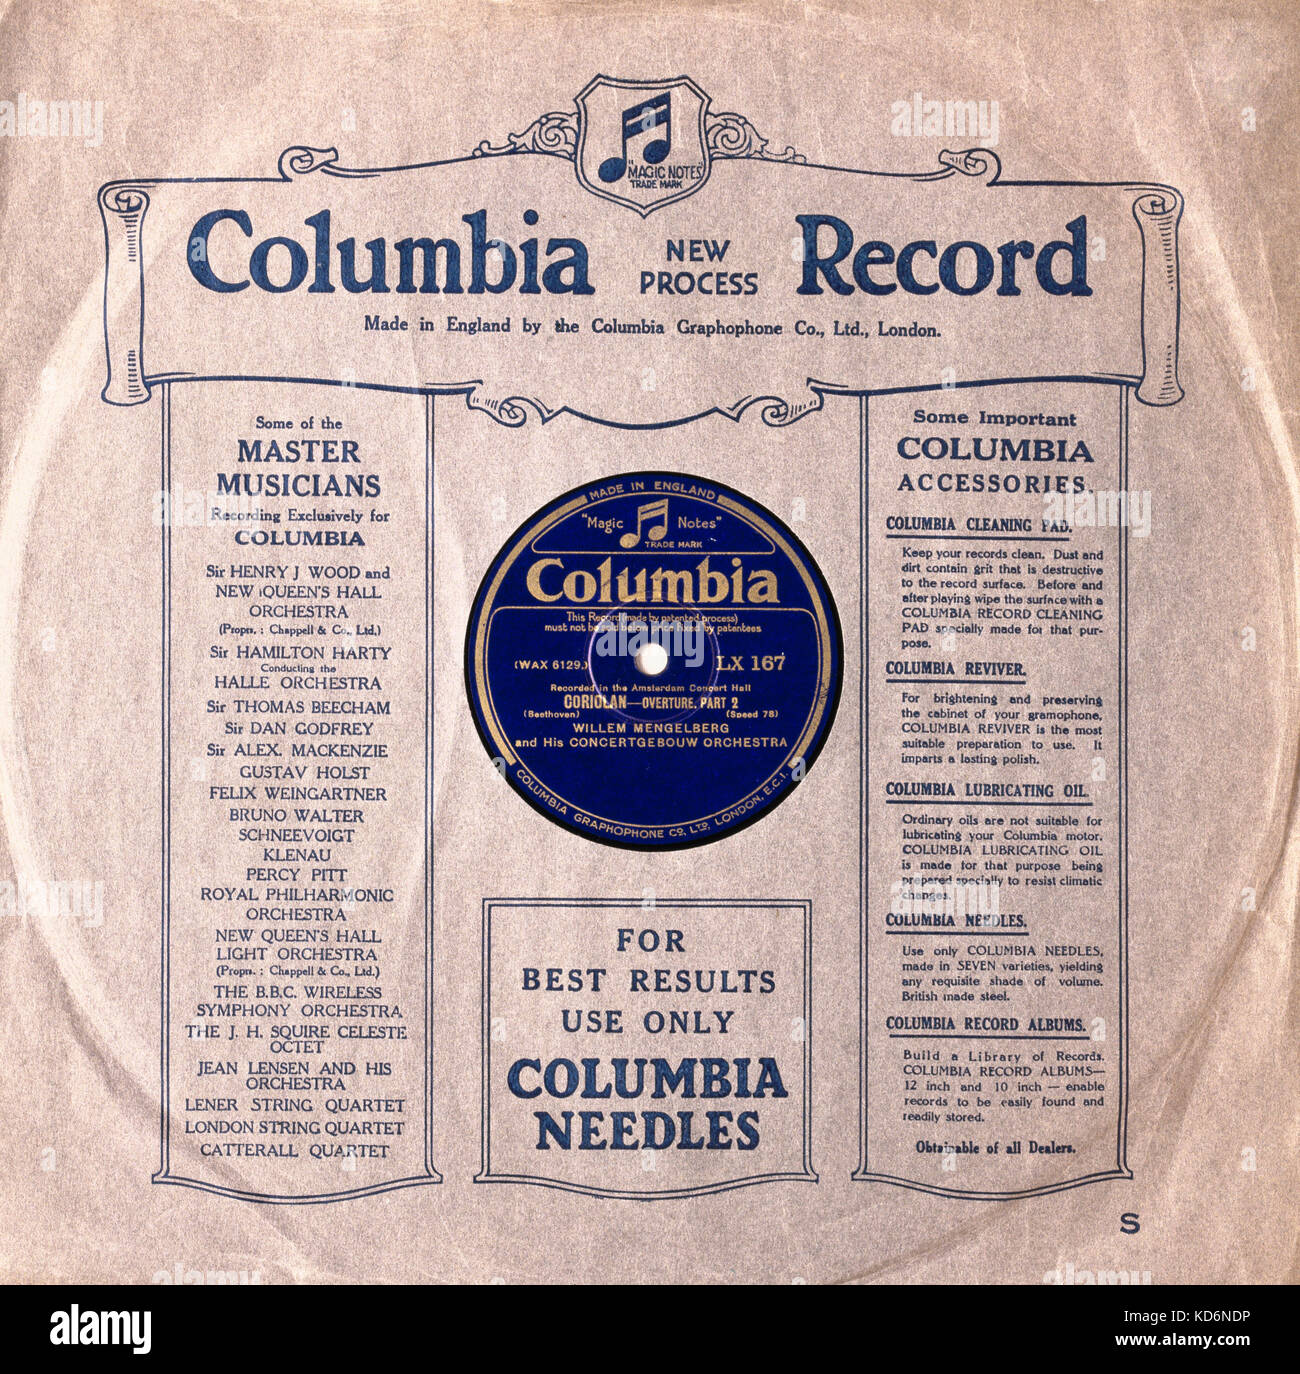 78 rpm Columbia Record cover (paper) - Coriolan overture written by Ludwig van Beethoven - performed by Willem Mengelberg and Concertgebouw Orchestra. (composed 1807 for Heinrich Joseph von Collin's 1804 tragedy about   Roman leader Gaius Marcius Coriolanus) Stock Photo